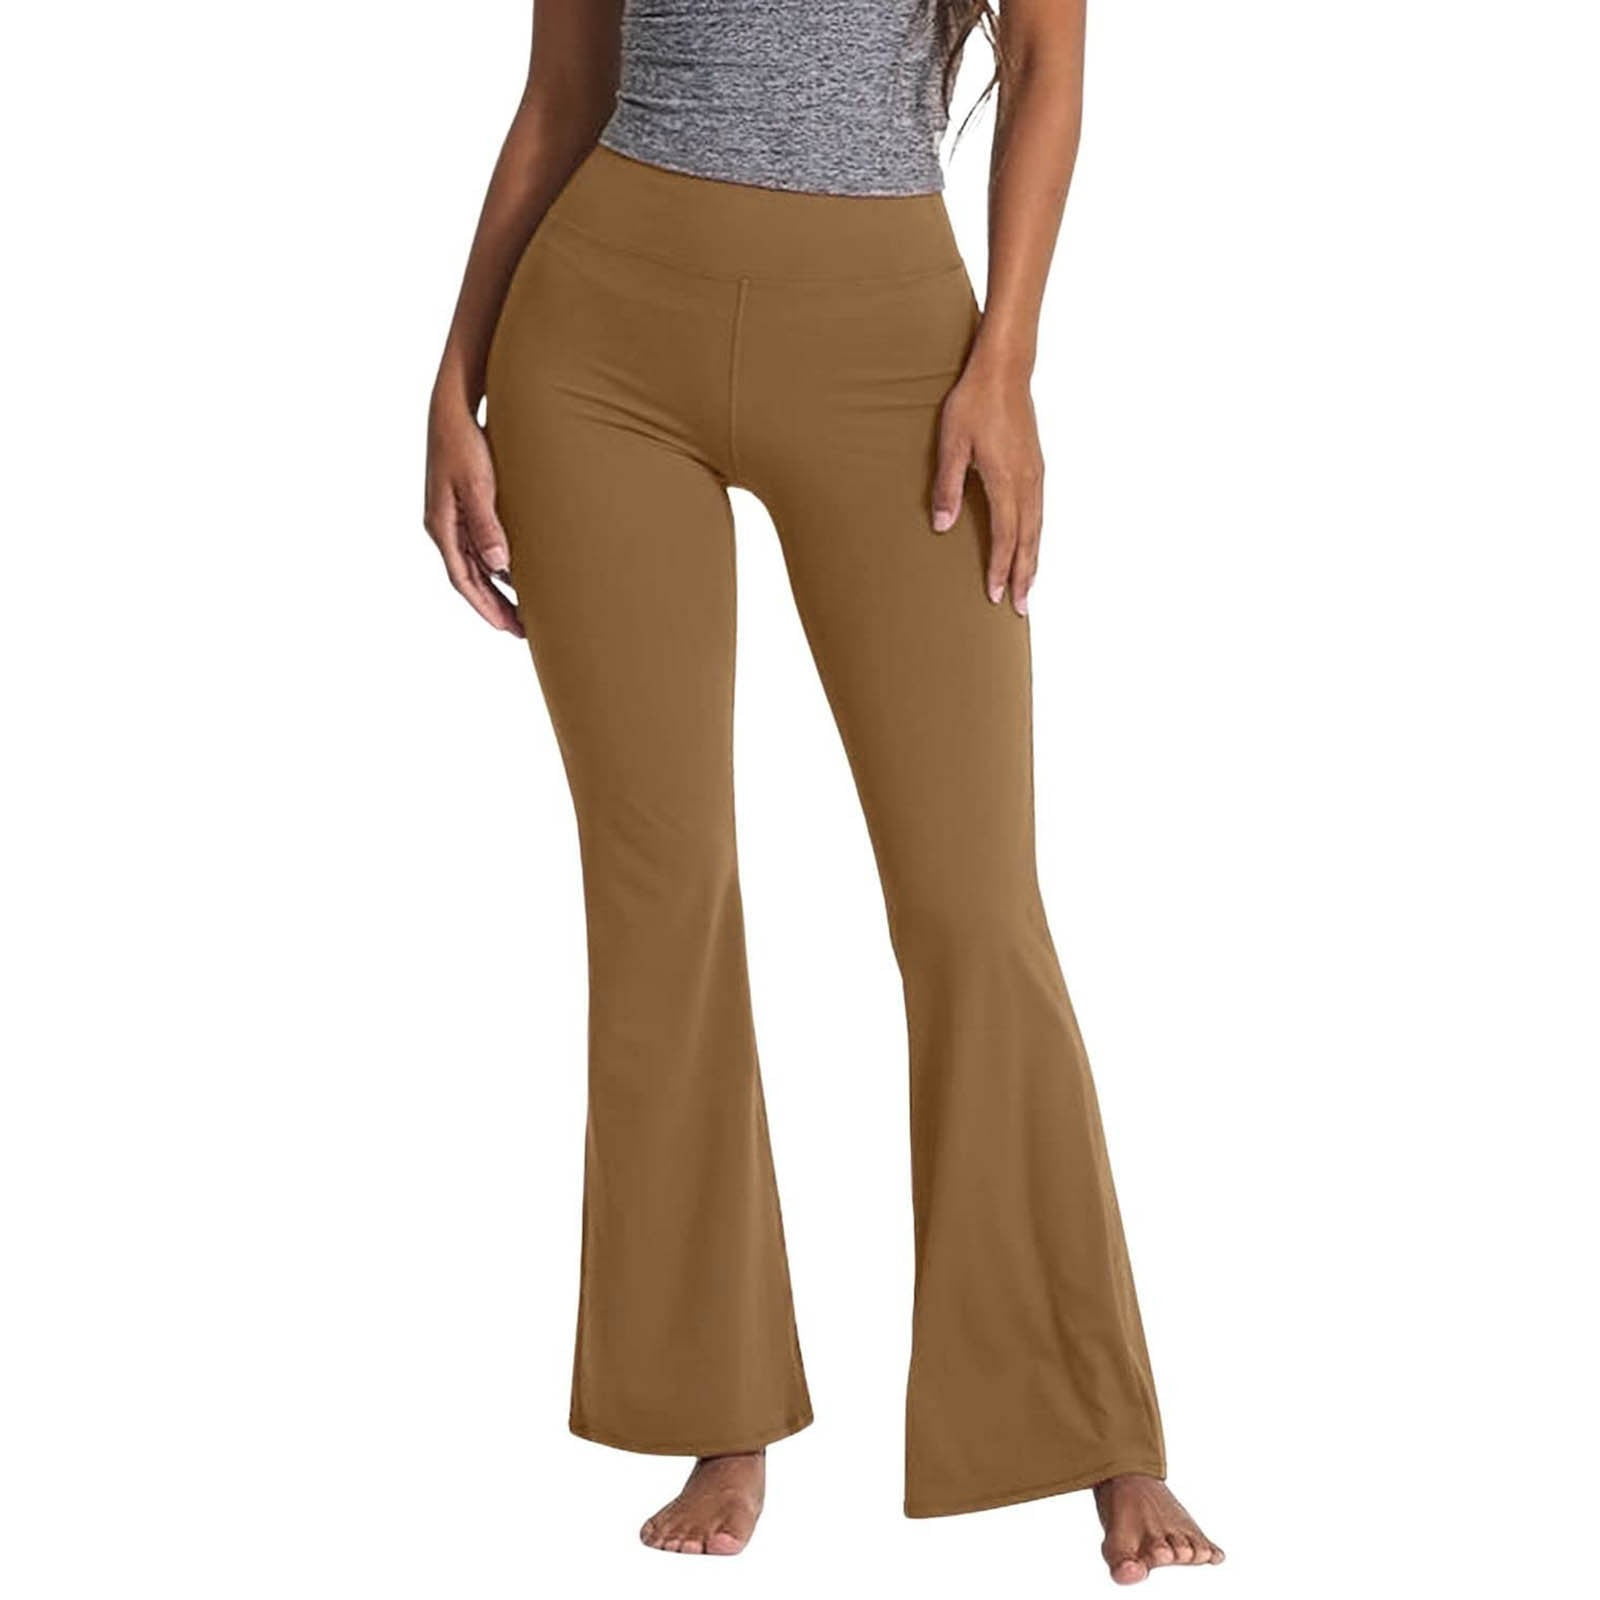 Plus Size Leggings With Pockets Flare Casual Bootcut Yoga Capris Bronze M 